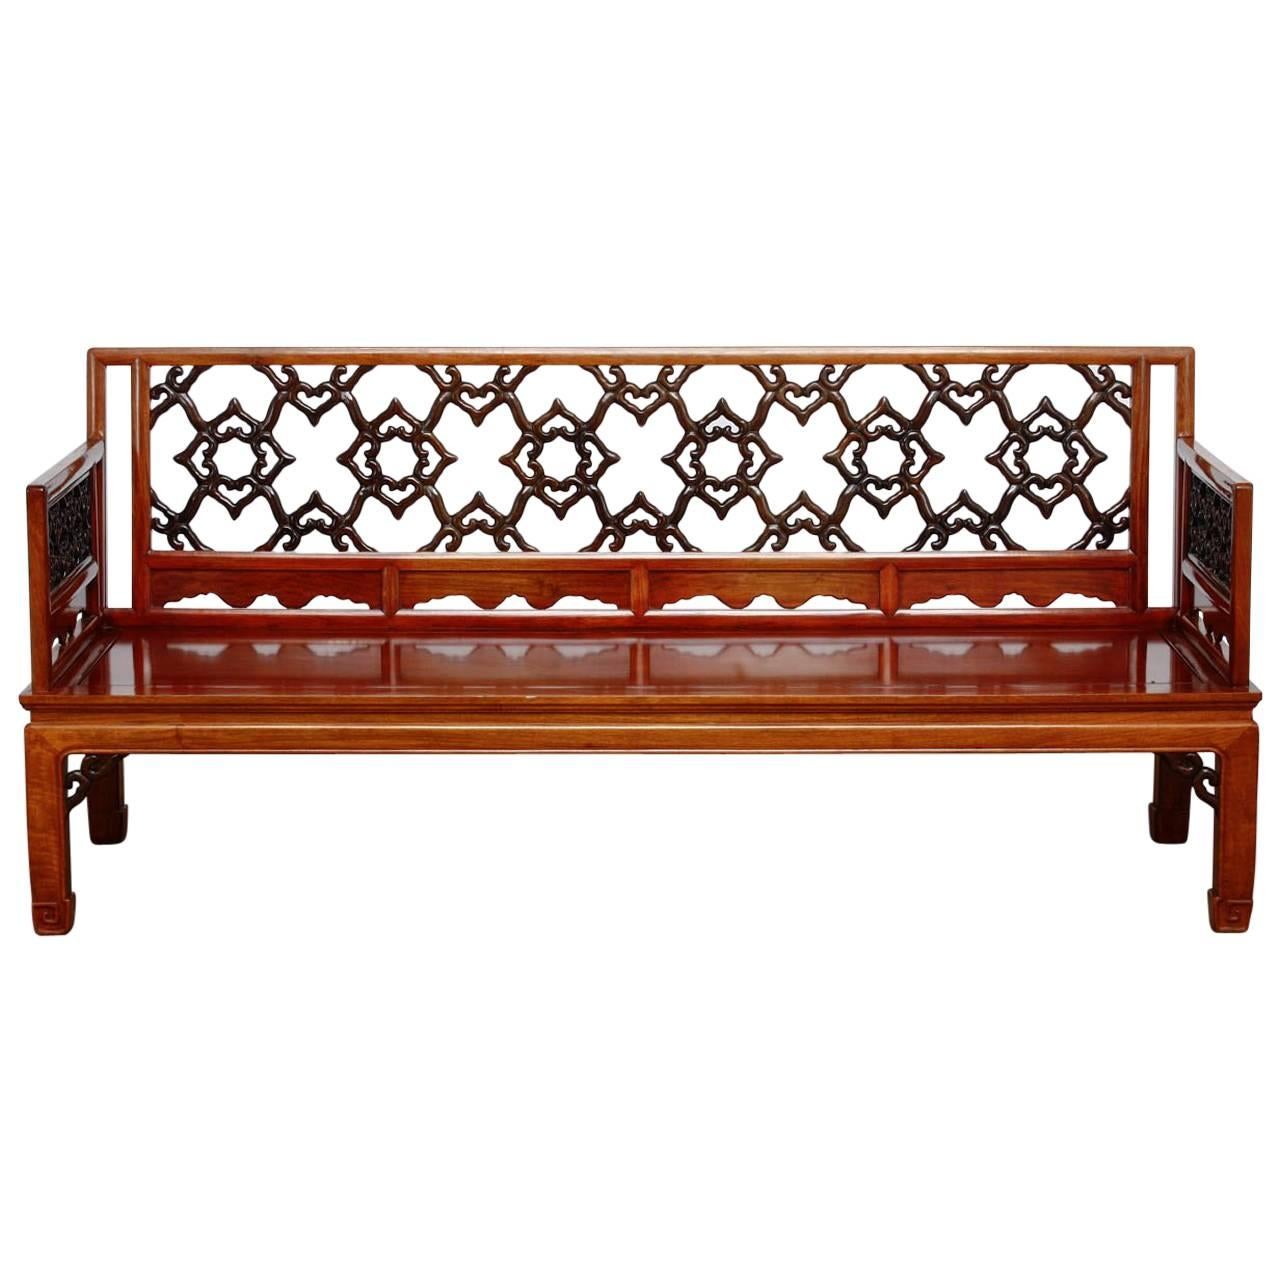 Chinese Carved Rosewood Daybed or Bench